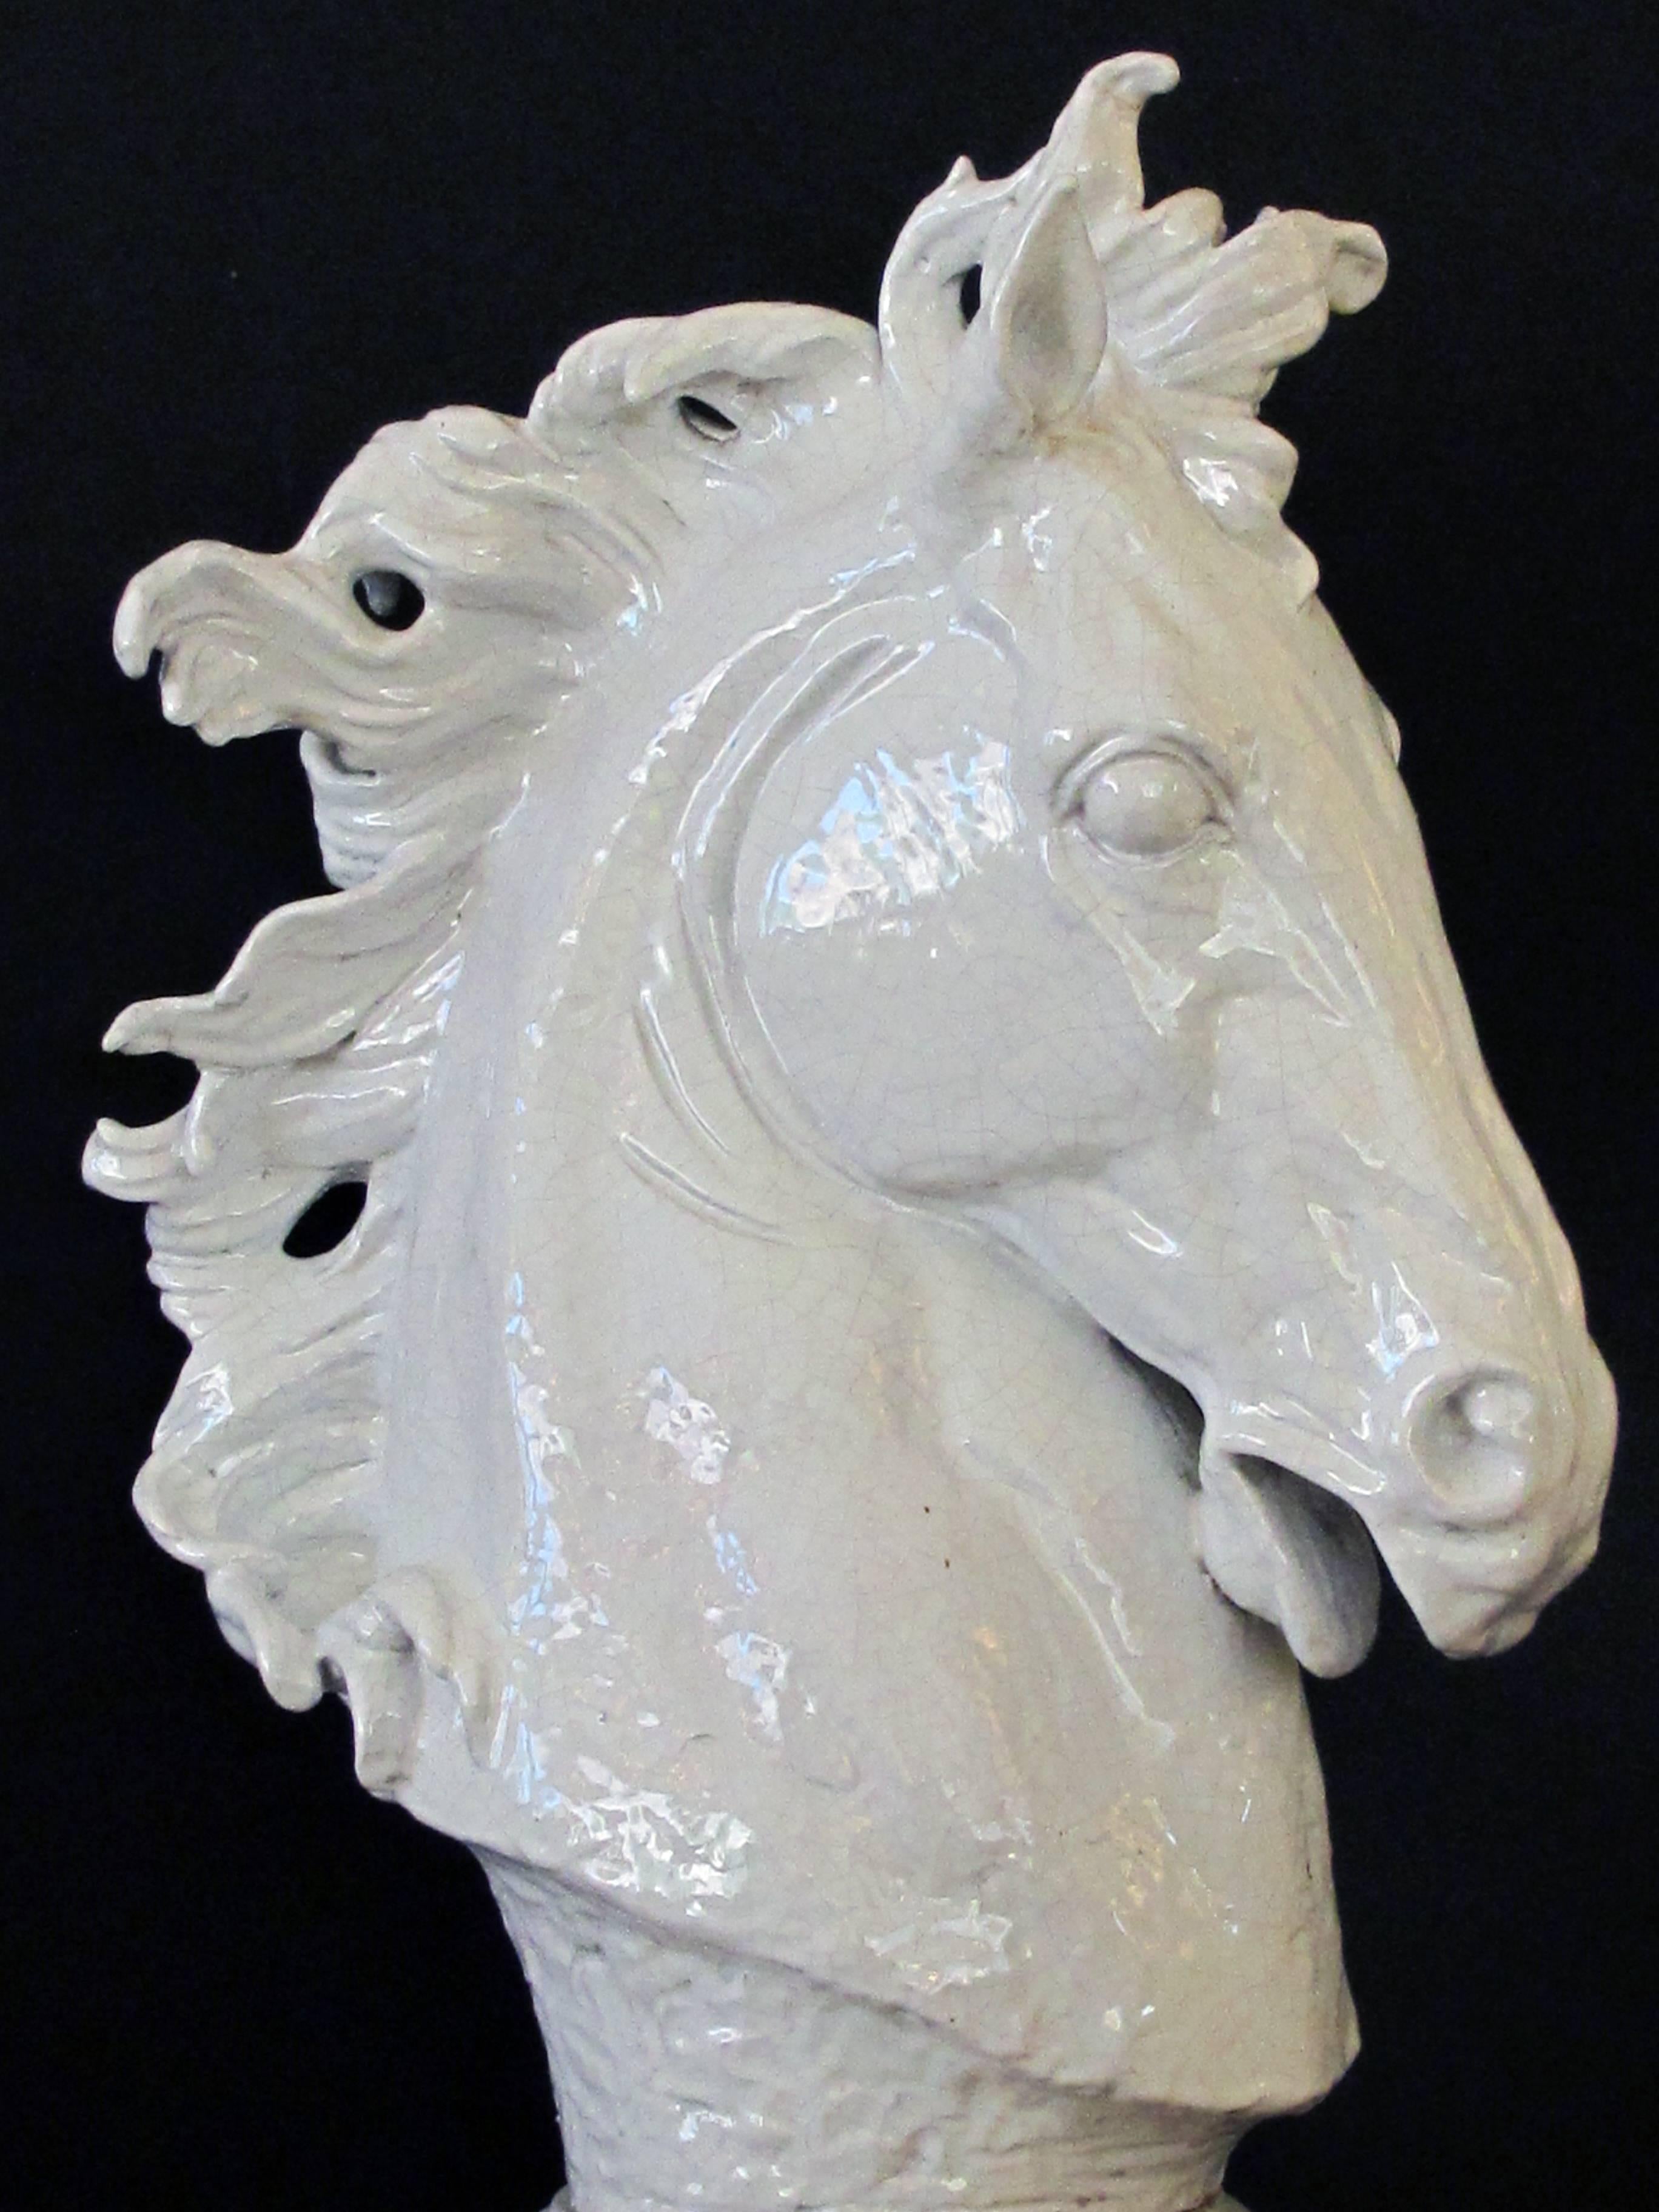 A monumental and expressive Italian Majolica midcentury white-glazed horse head; this expressive, forcefully-rendered horse head sculpture with flared nostrils and lively mane; raised on a separate base; fine overall craquelure.